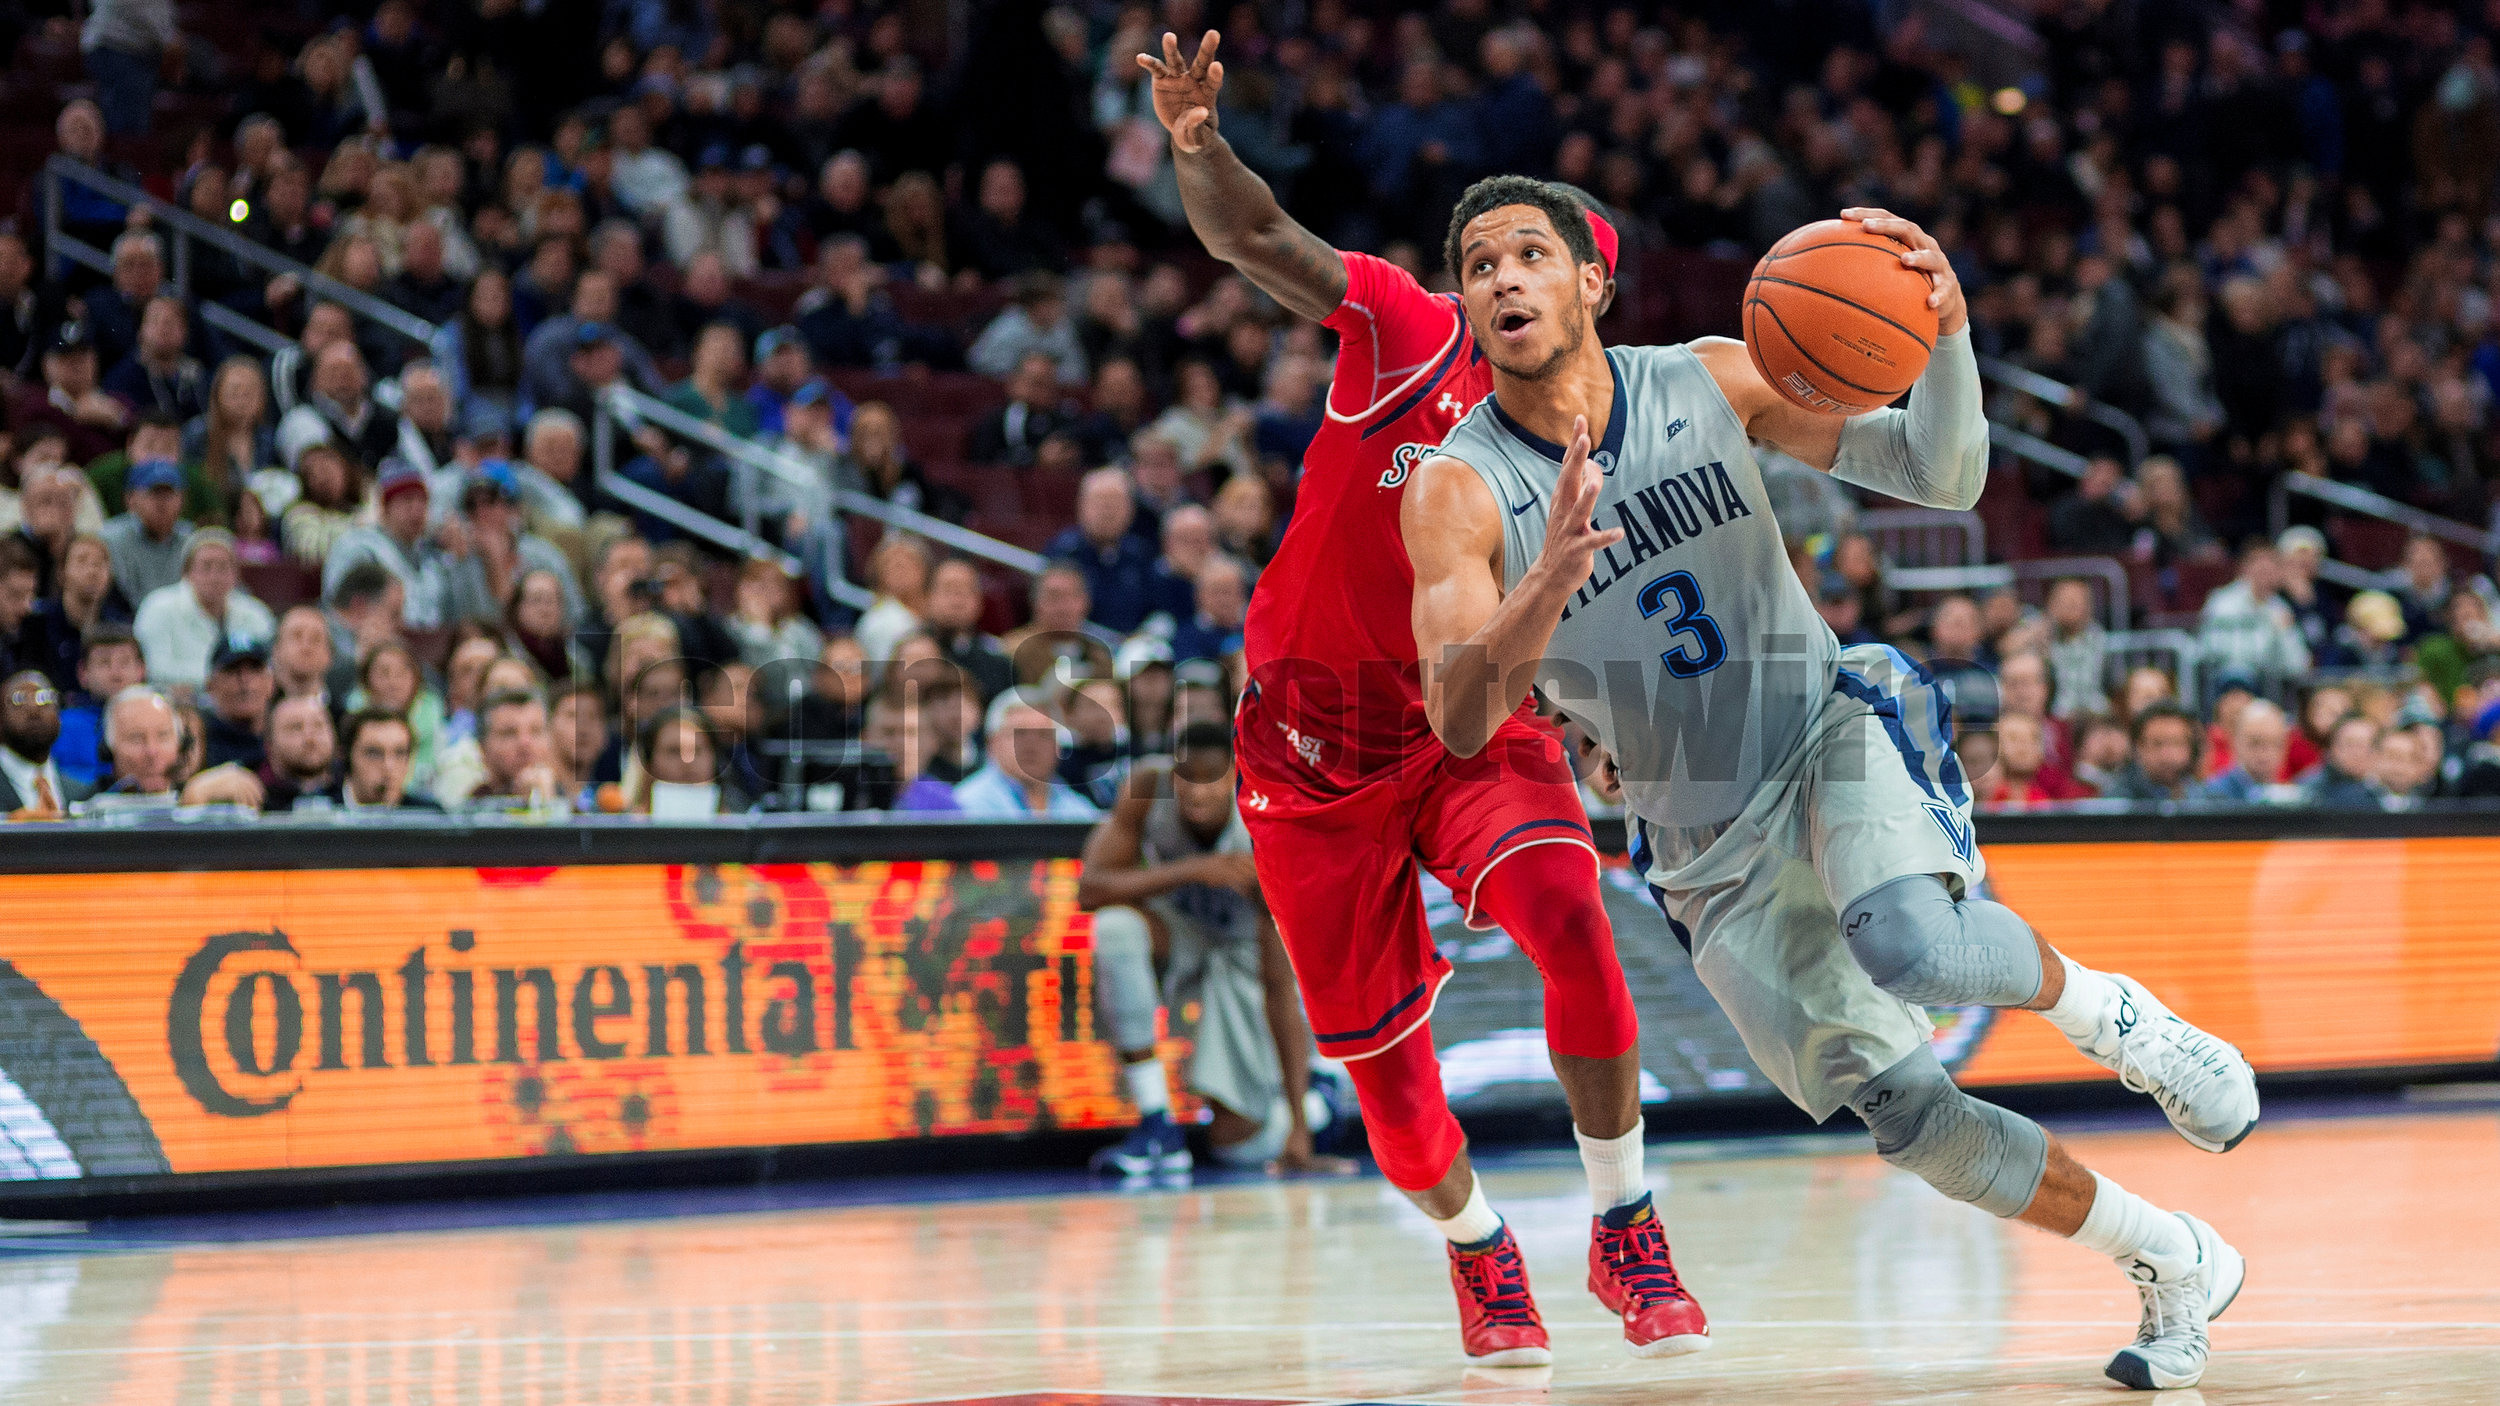  13 February 2016: Villanova Wildcats guard Josh Hart (3) in action charges into the lane during the NCAA basketball game between the St. John's Red Storm and the Villanova Wildcats played at the Wells Fargo Center in Philadelphia, PA. (Photo by Gavi